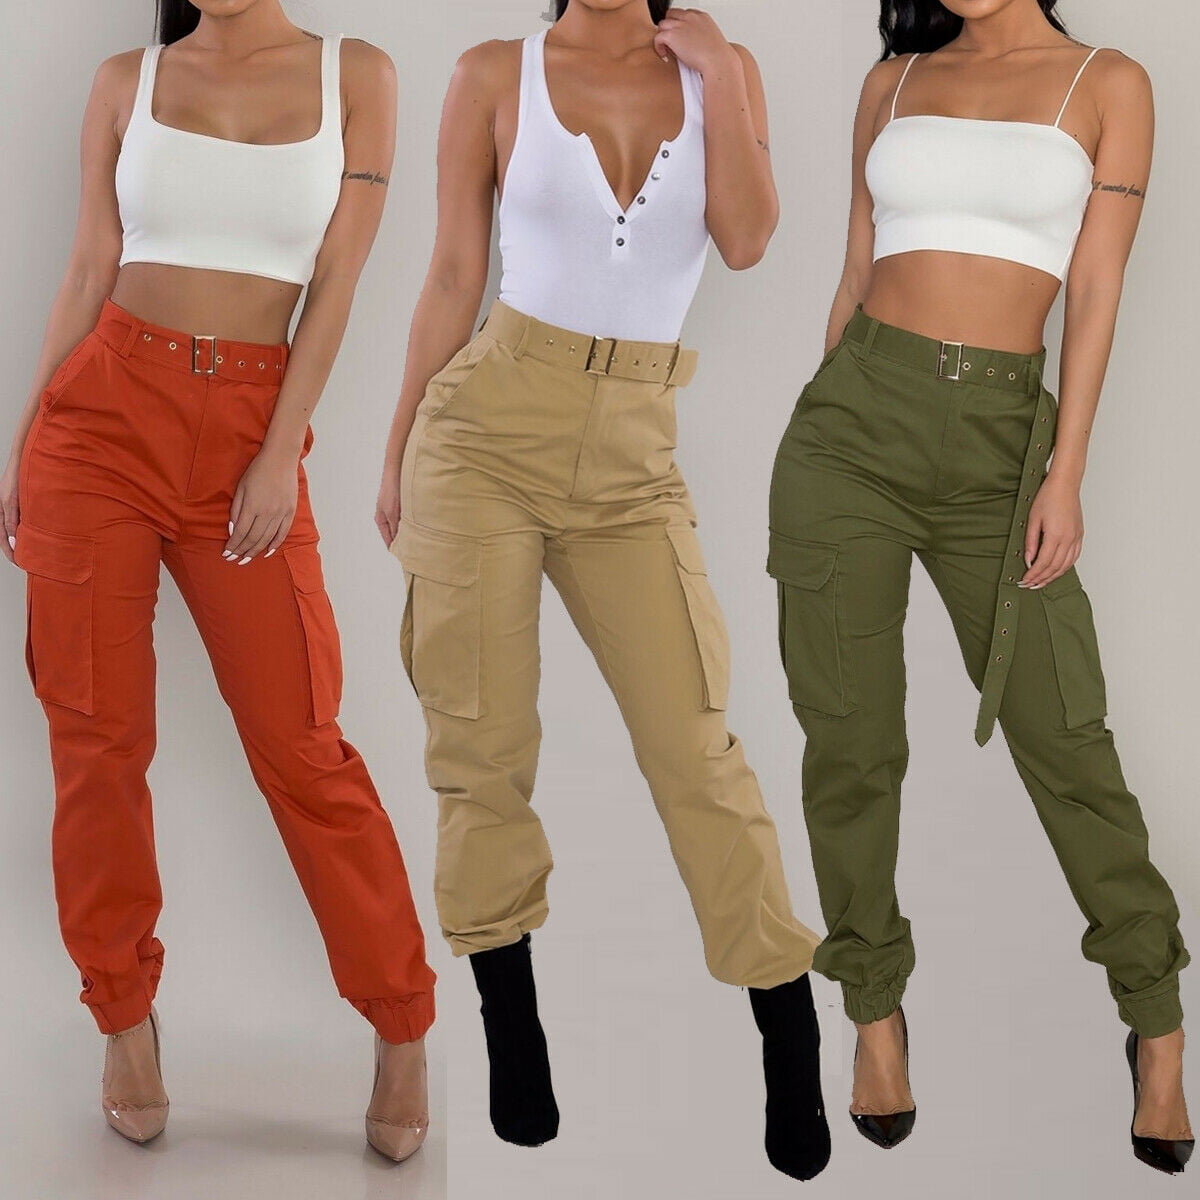 Women Overalls Pants Army Military Combat Style Pant Cargo Trousers ...